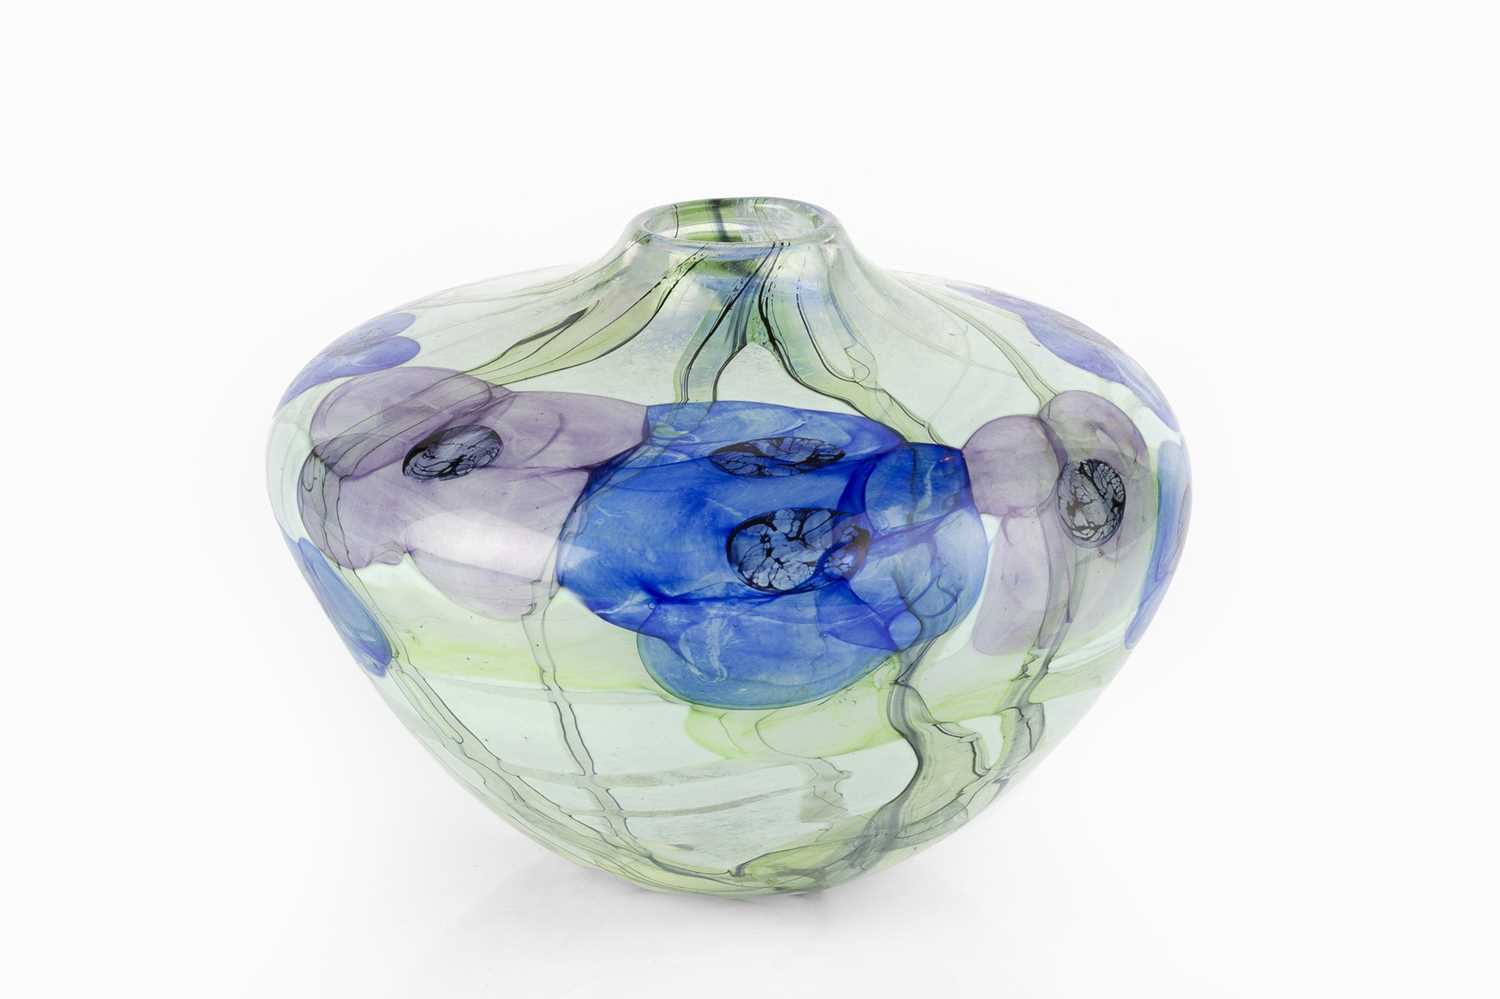 Peter Layton (b.1937) Vase, 1990 glass, decorated with blue and purple flowers signed and dated 13.